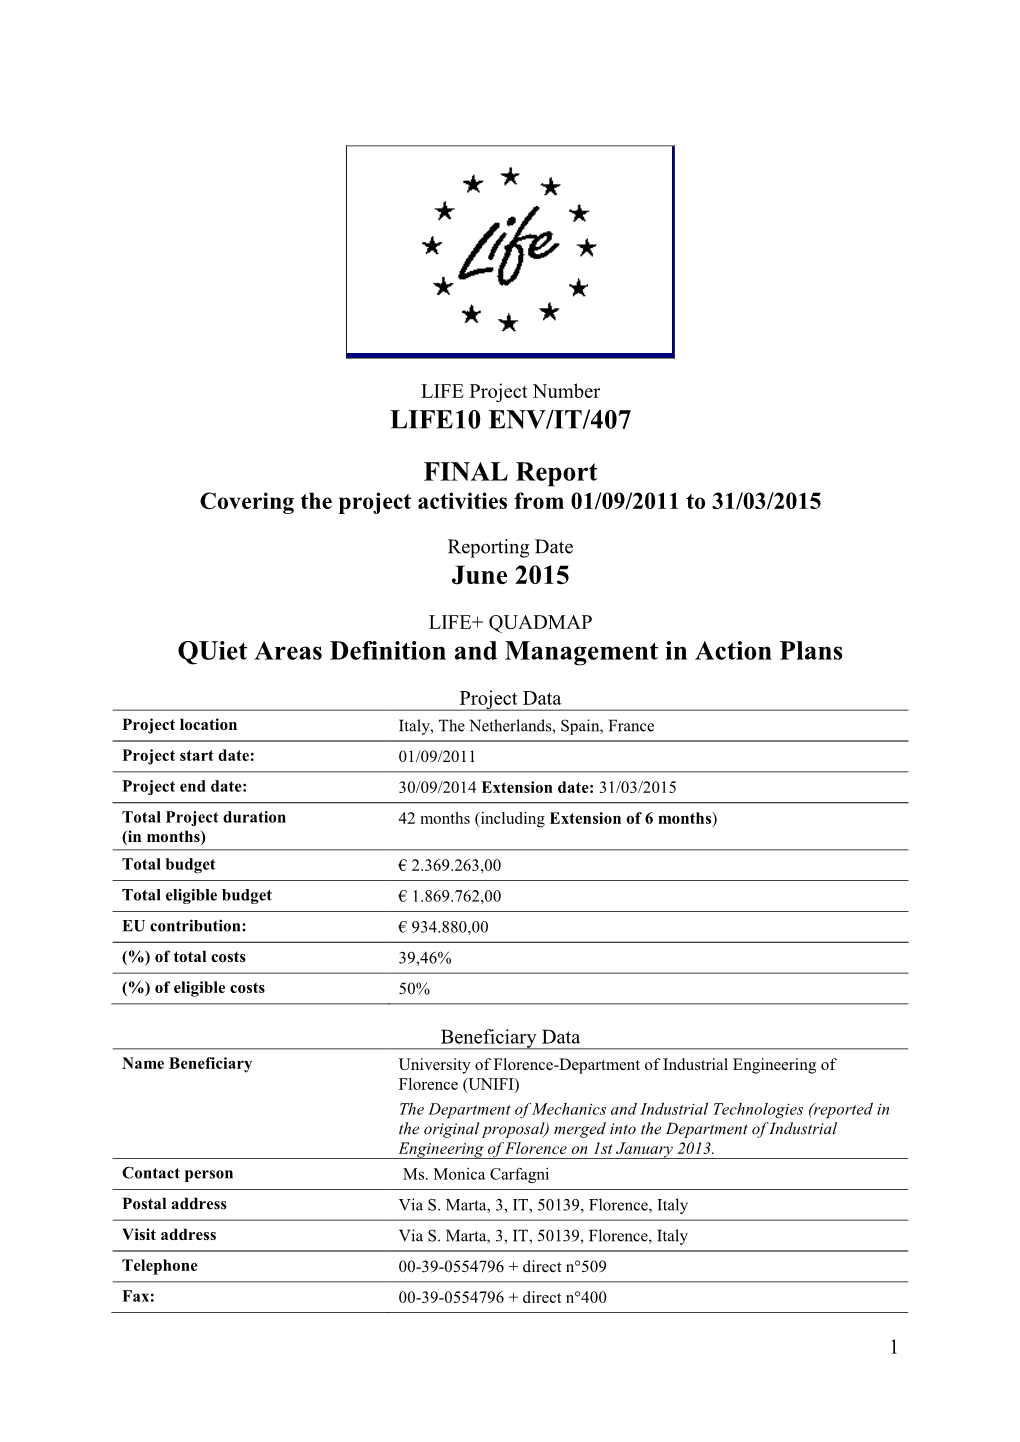 LIFE10 ENV/IT/407 FINAL Report Covering the Project Activities from 01/09/2011 to 31/03/2015